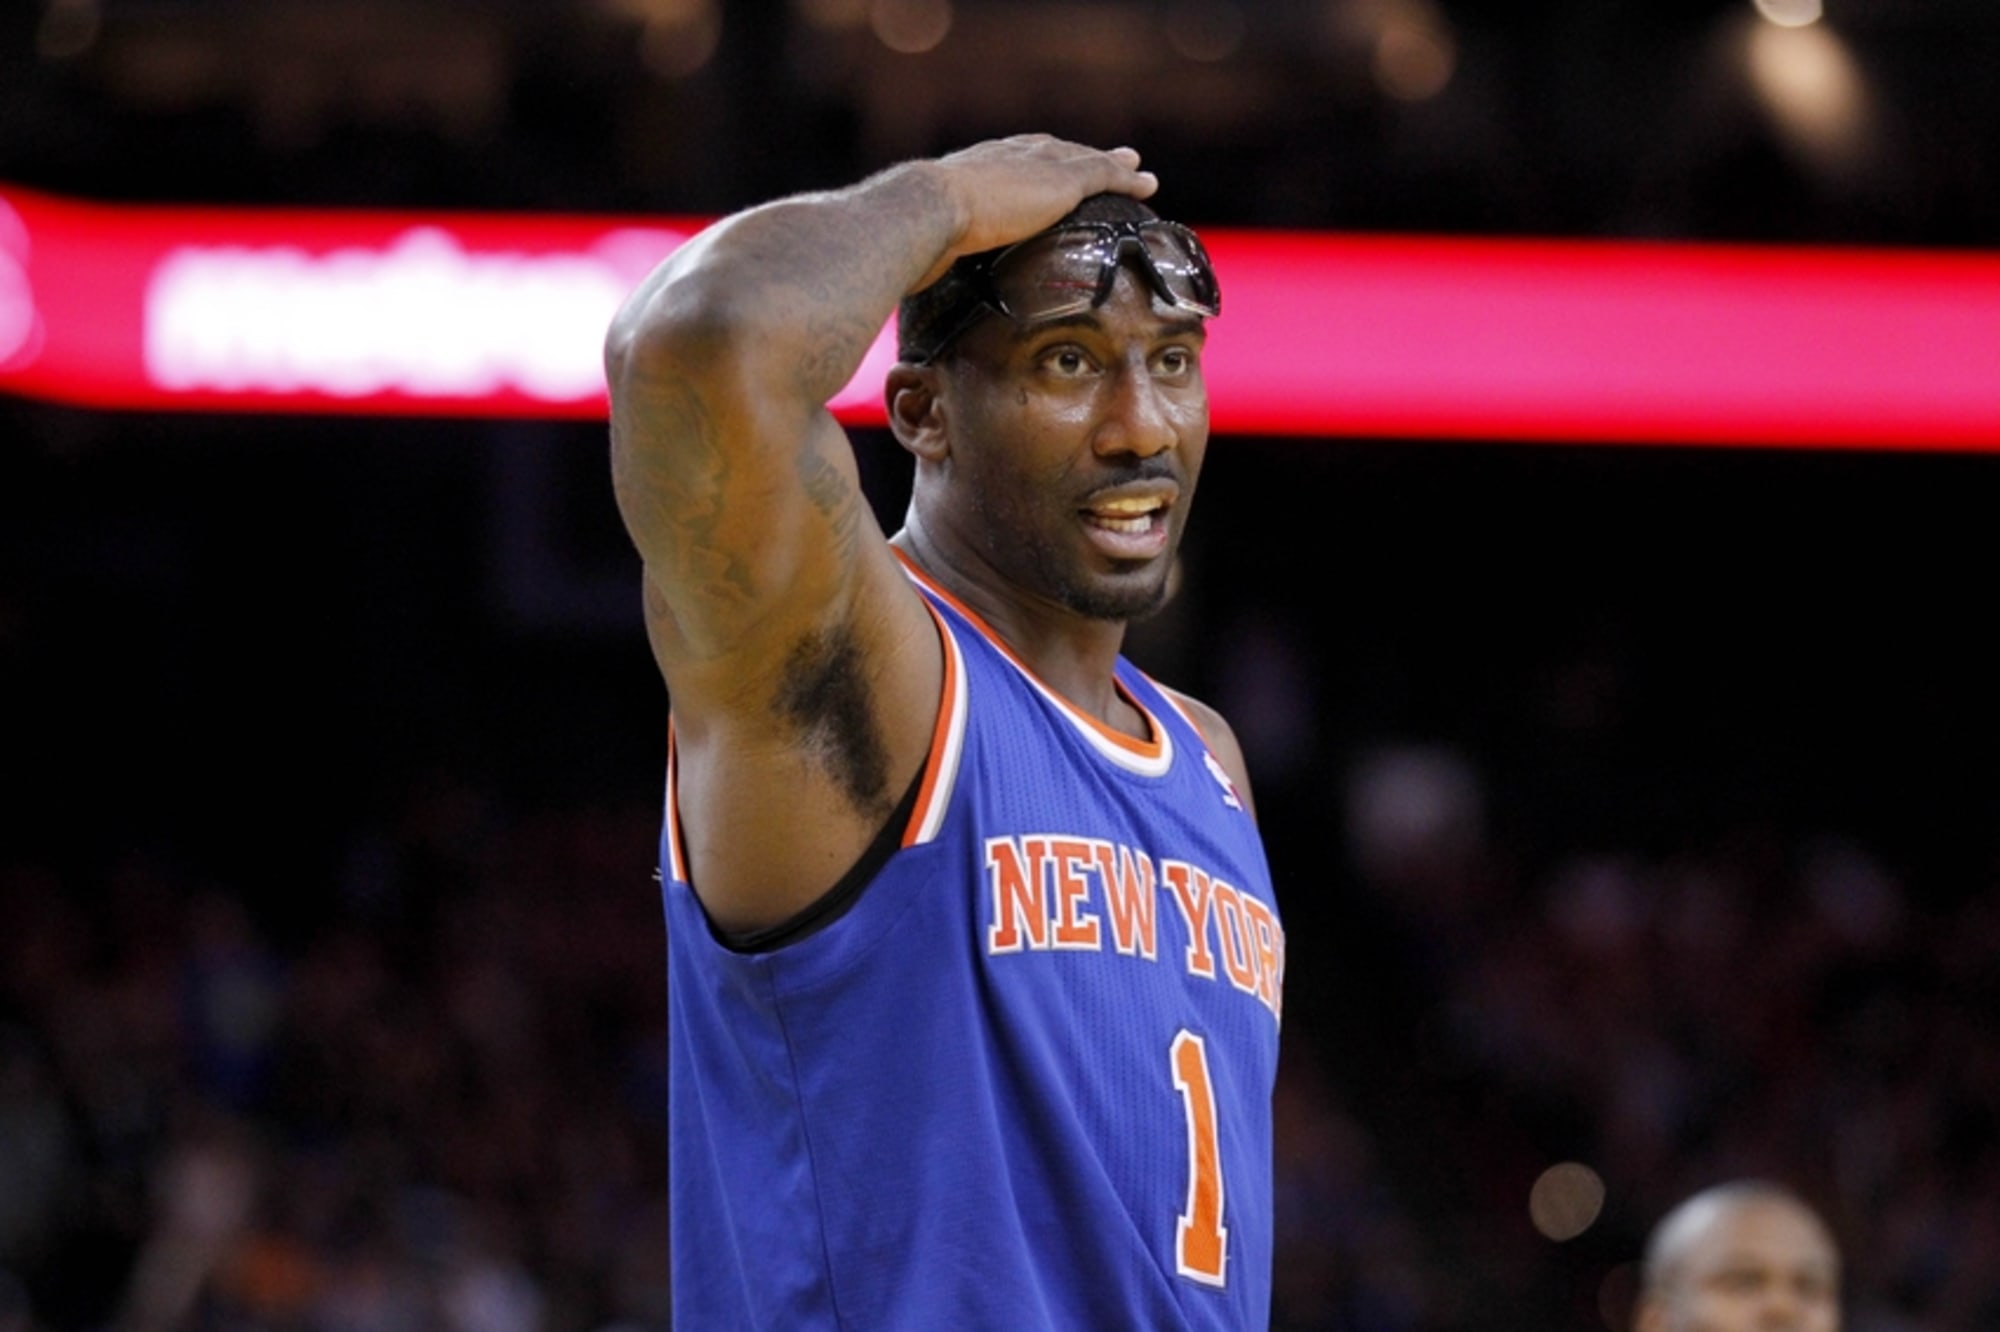 New York Knicks: Does Amar'e Stoudemire Re-Sign?